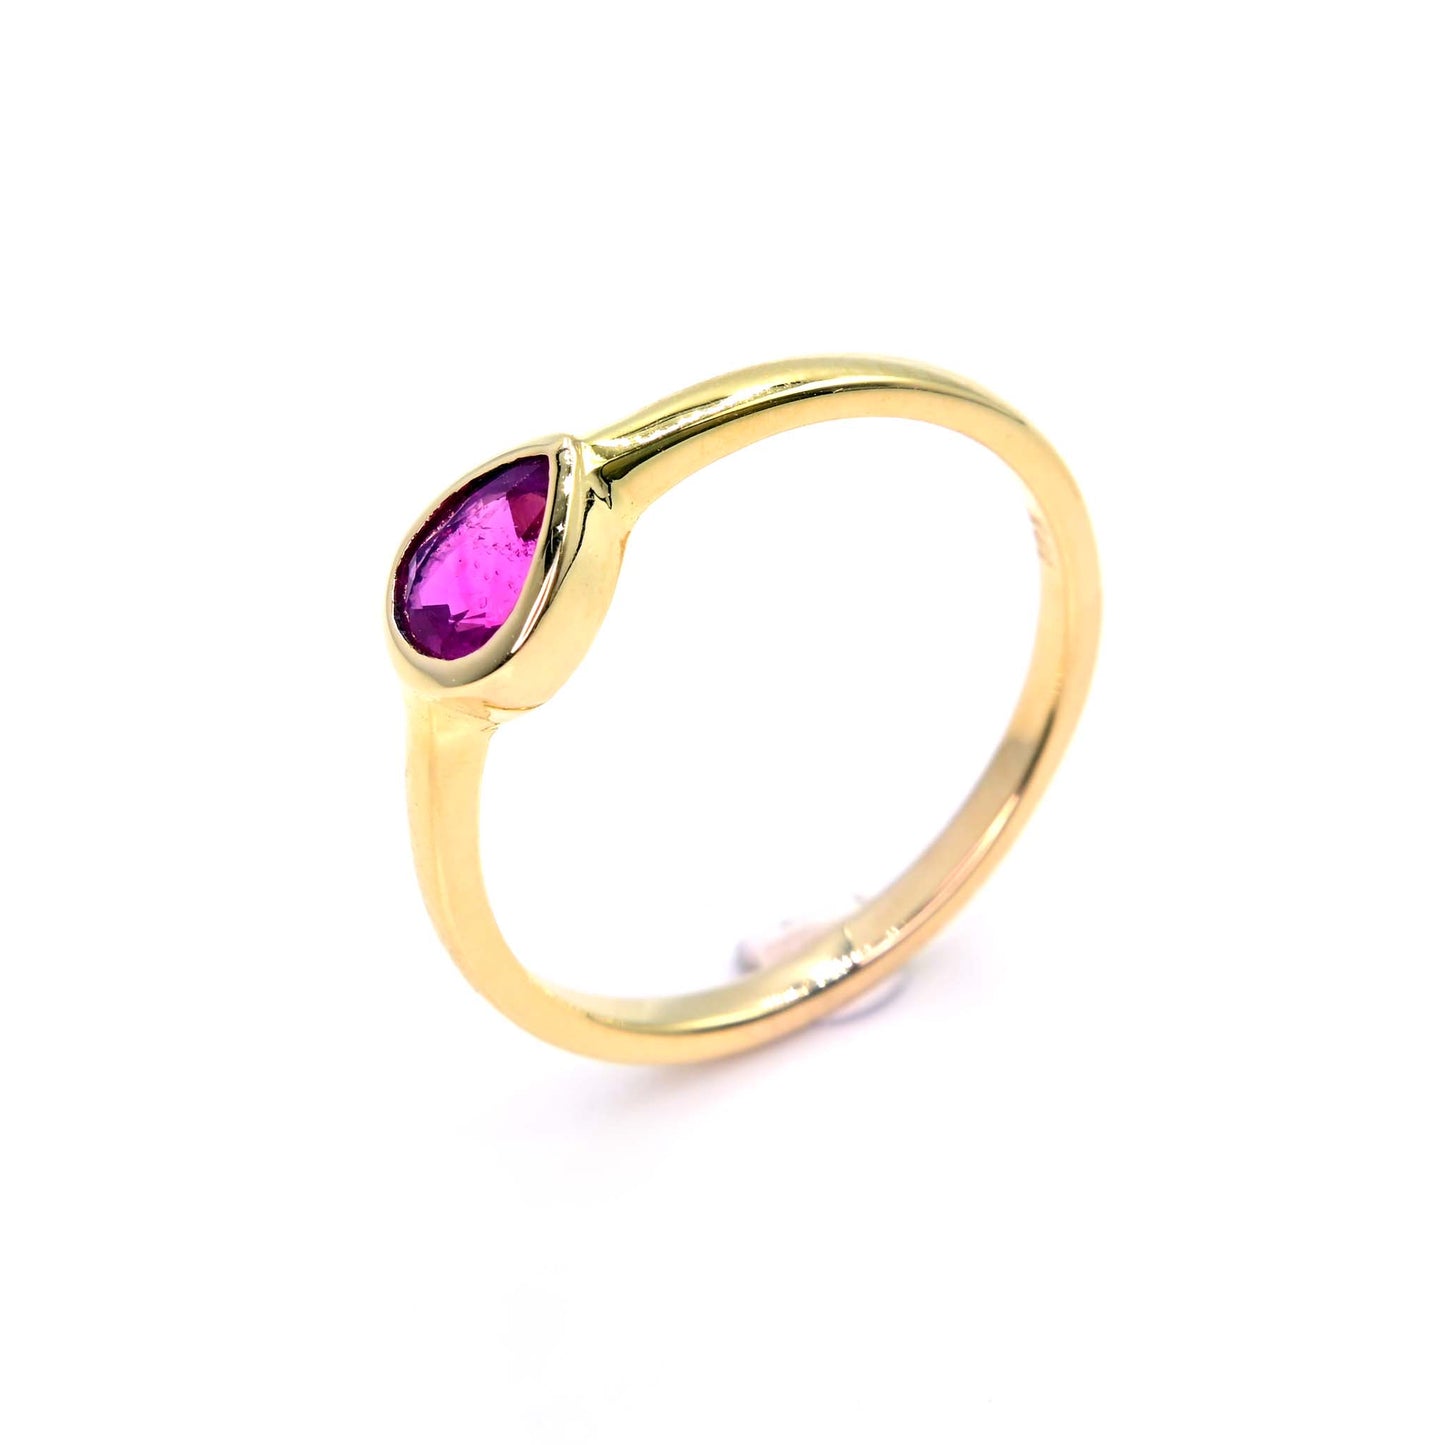 Handmade ruby ring in 18k from Chiang Mai